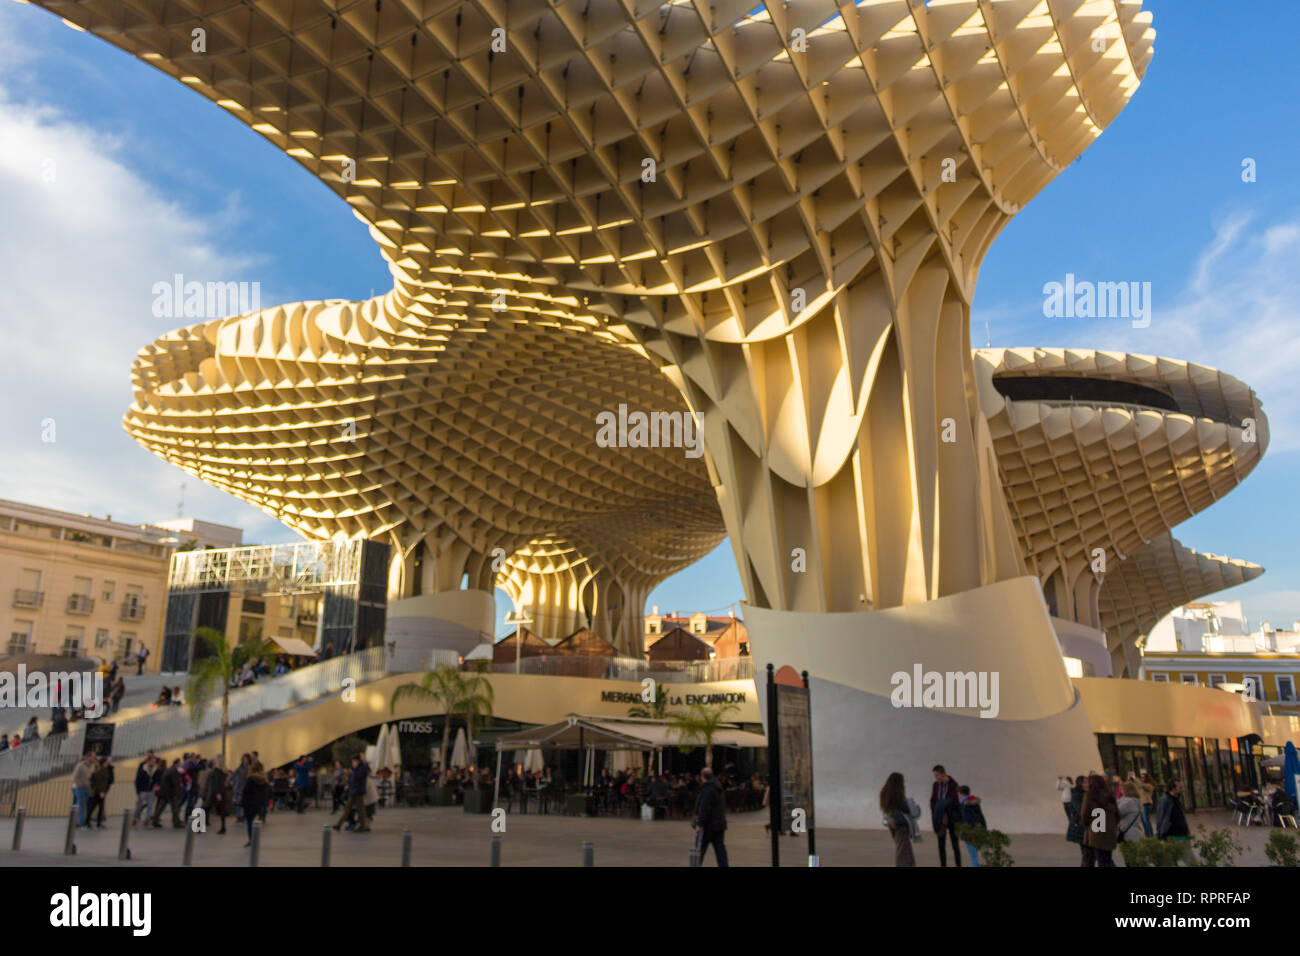 December afternoon at the Metropol Parasol in downtown Seville with the typical Spanish lifestyle of enjoying life outside with friends and family Stock Photo